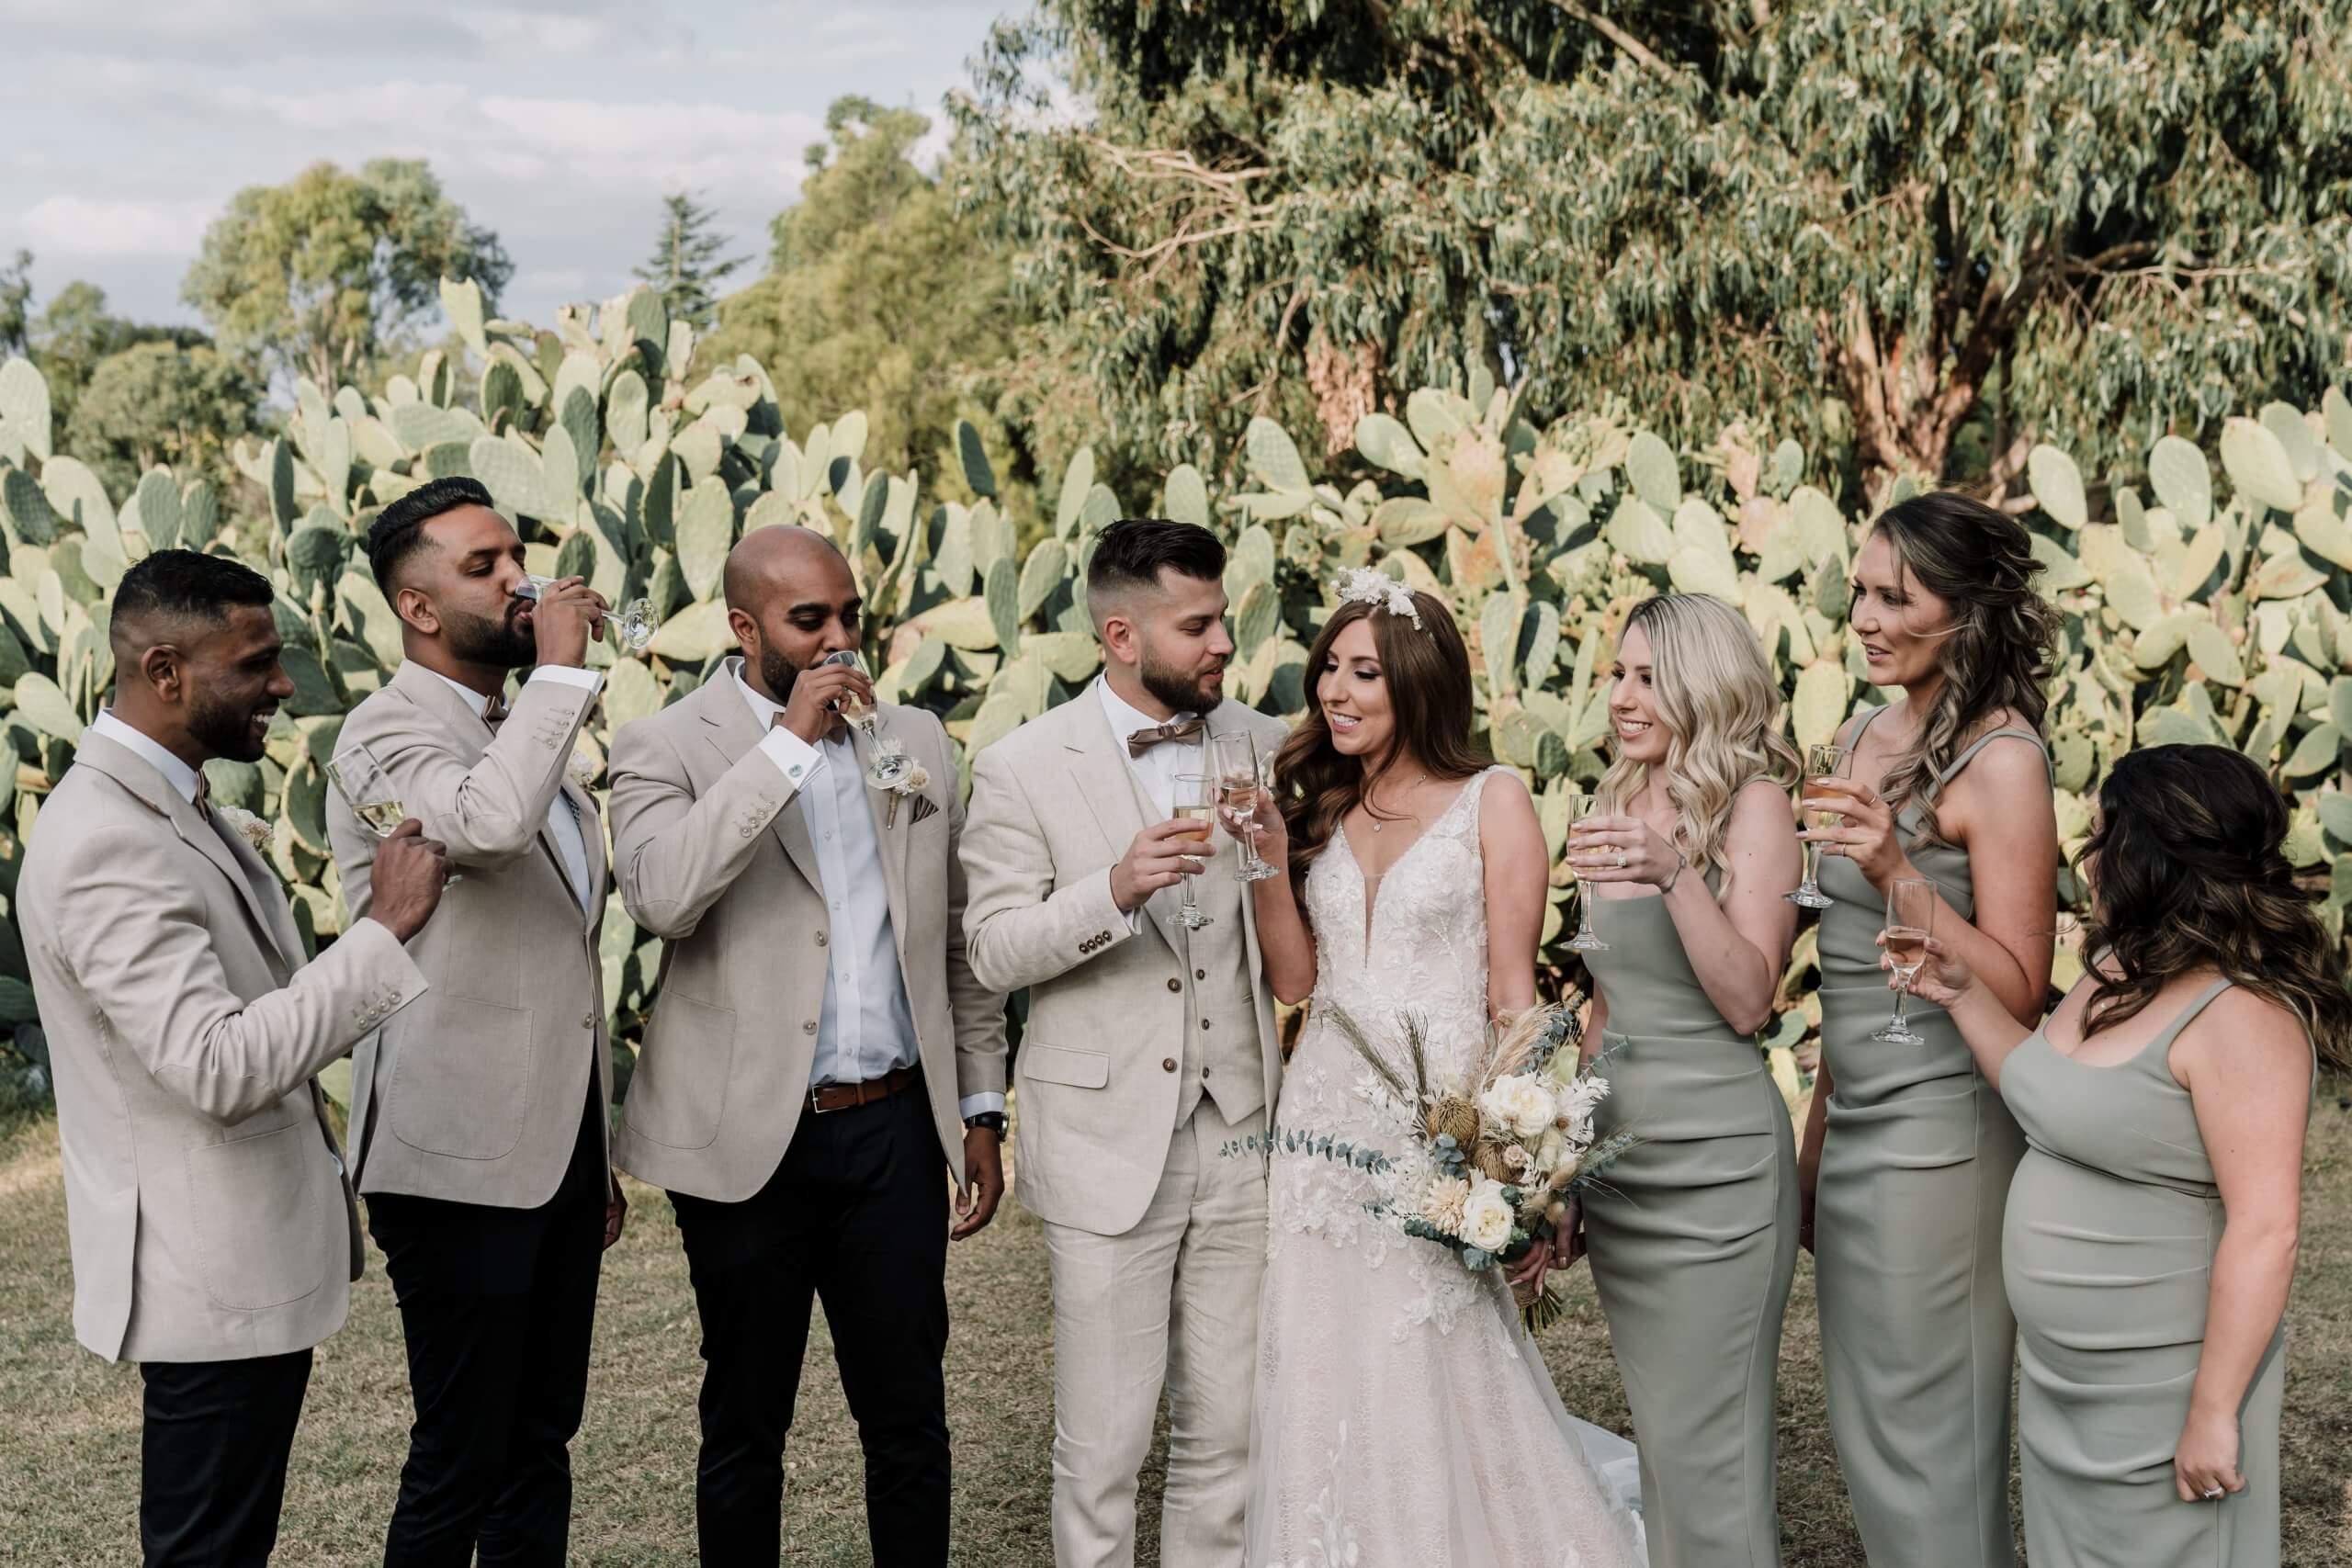 The bridal party holds and toasts flutes of champagne while standing in front of a cactus wall.